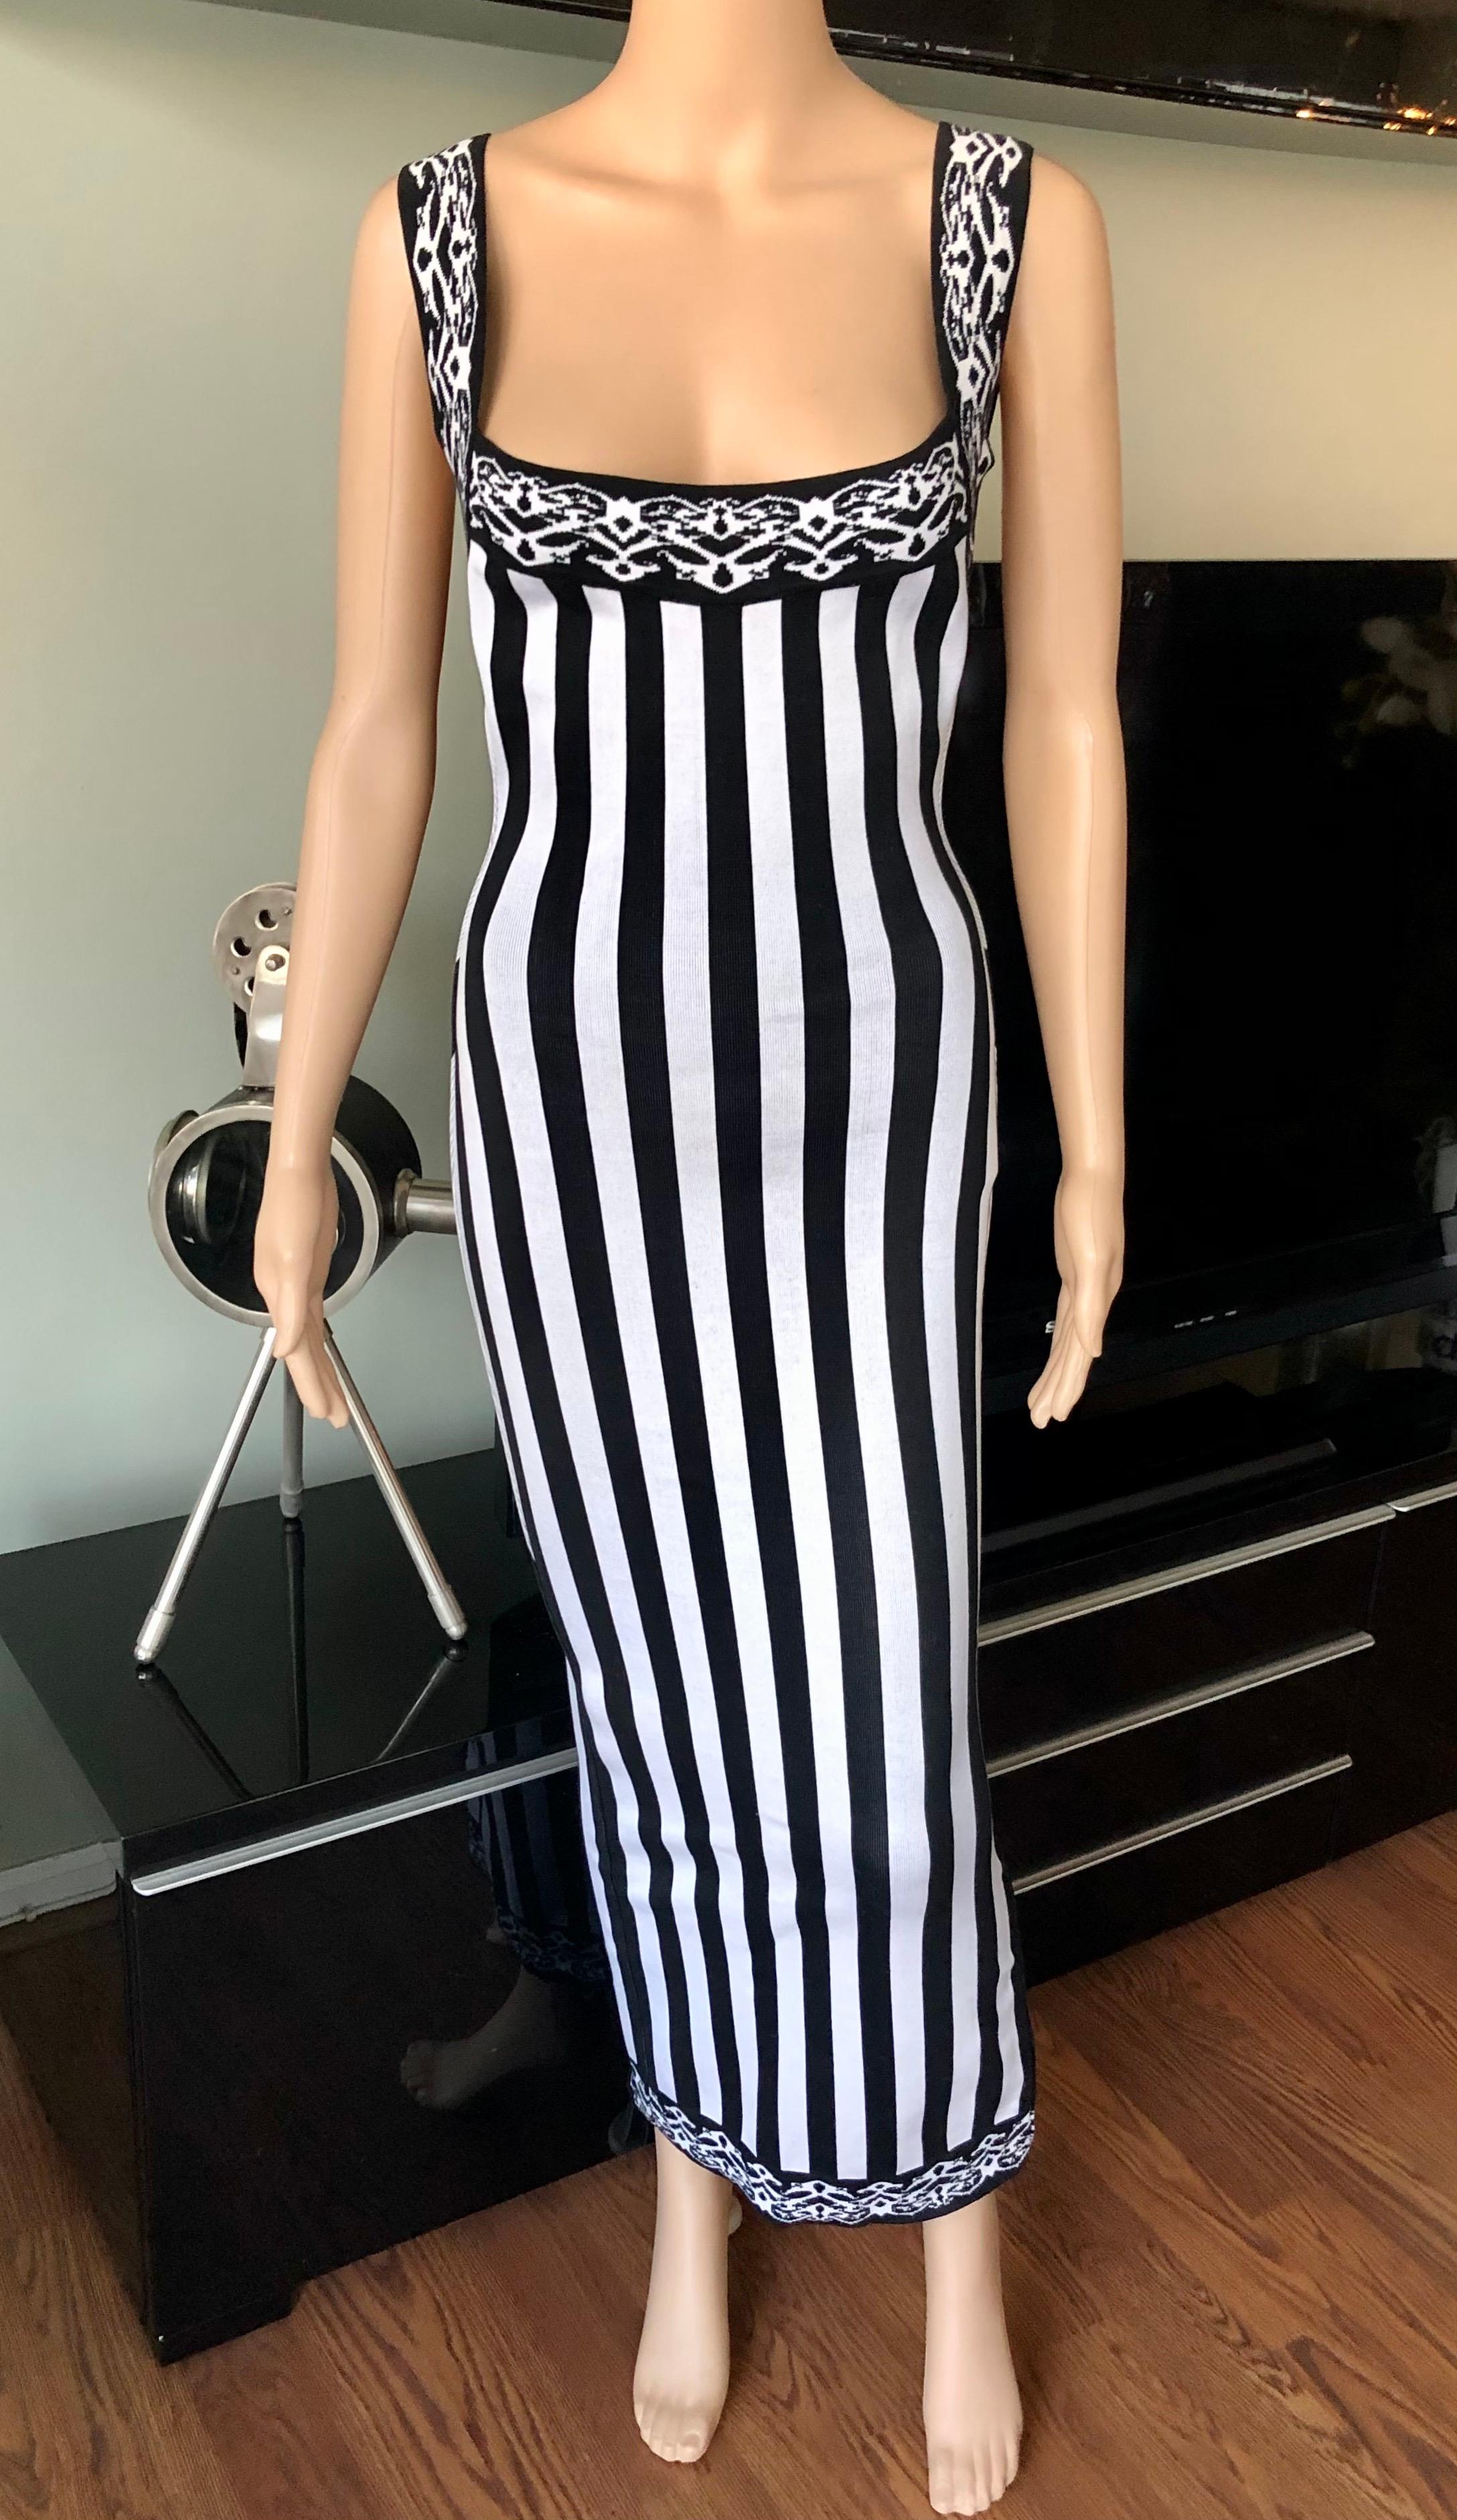 Azzedine Alaia S/S 1992 Runway Vintage Striped Bodycon Backless Maxi Dress Size M

Alaïa maxi bodycon dress with striped print throughout, squared neckline, open back and concealed zip closure at back.
